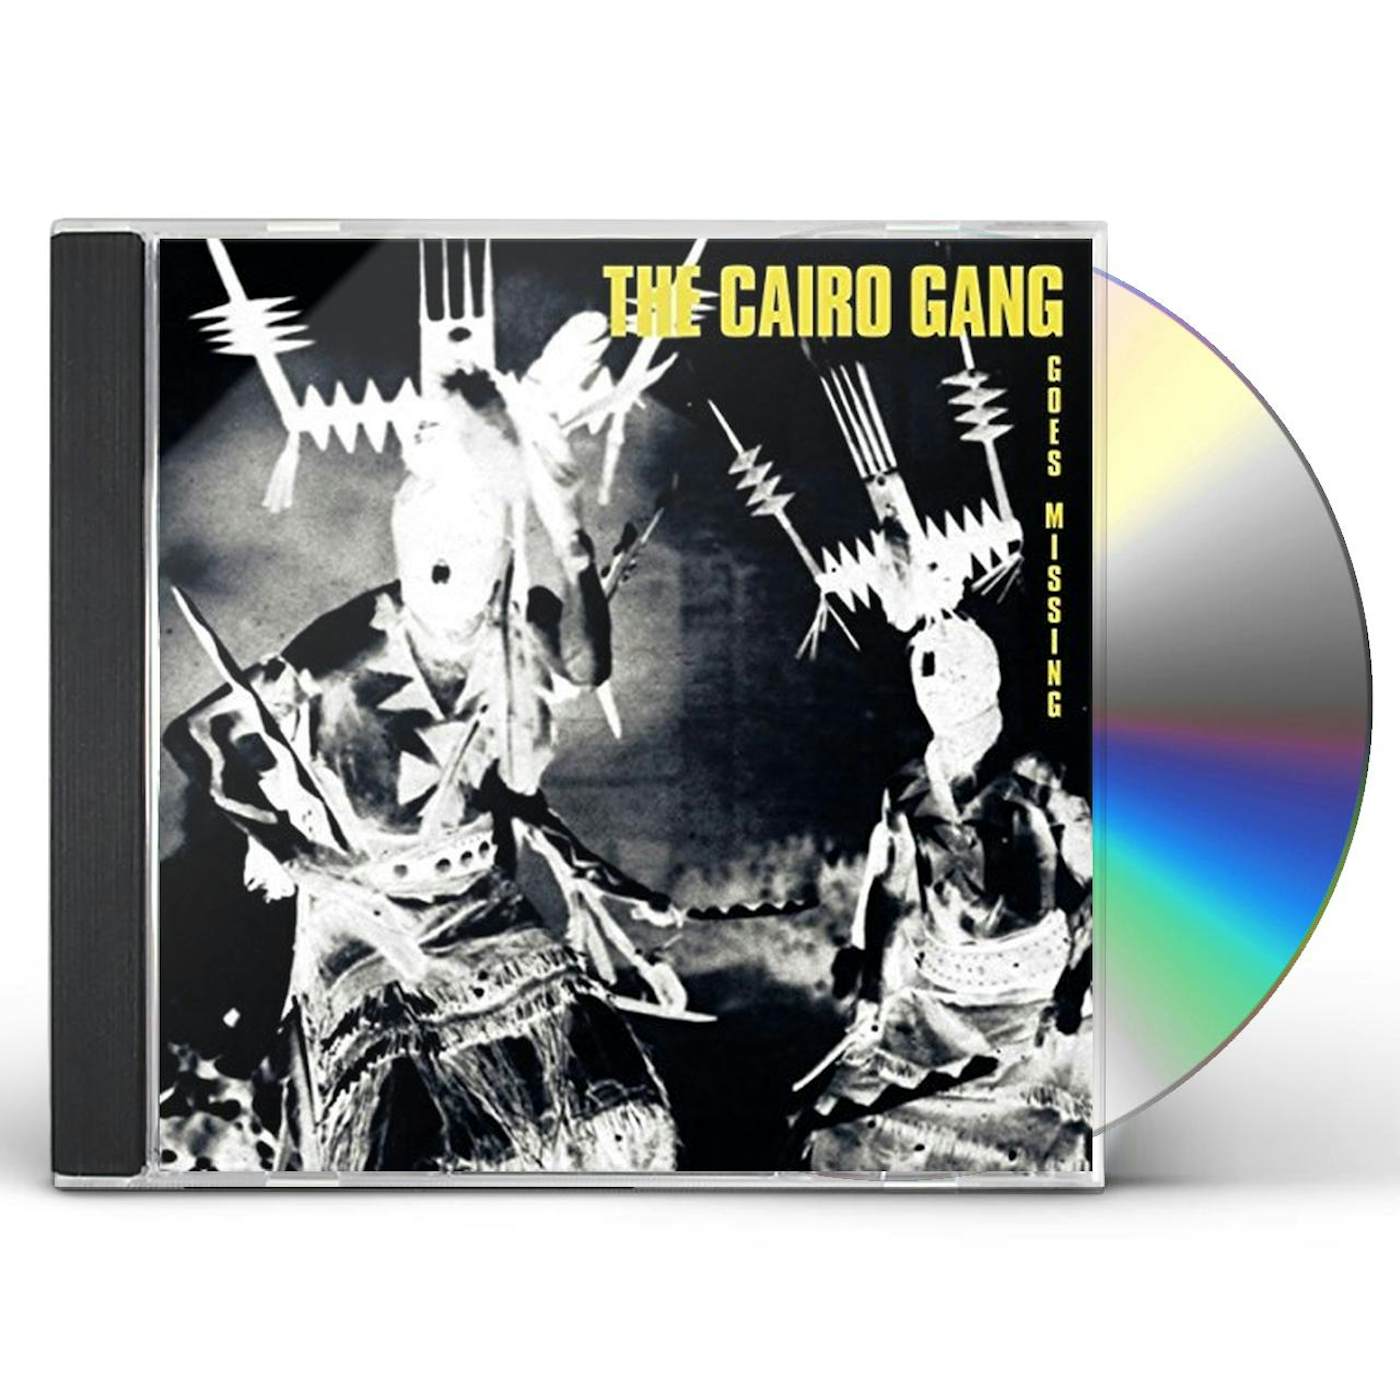 The Cairo Gang GOES MISSING CD